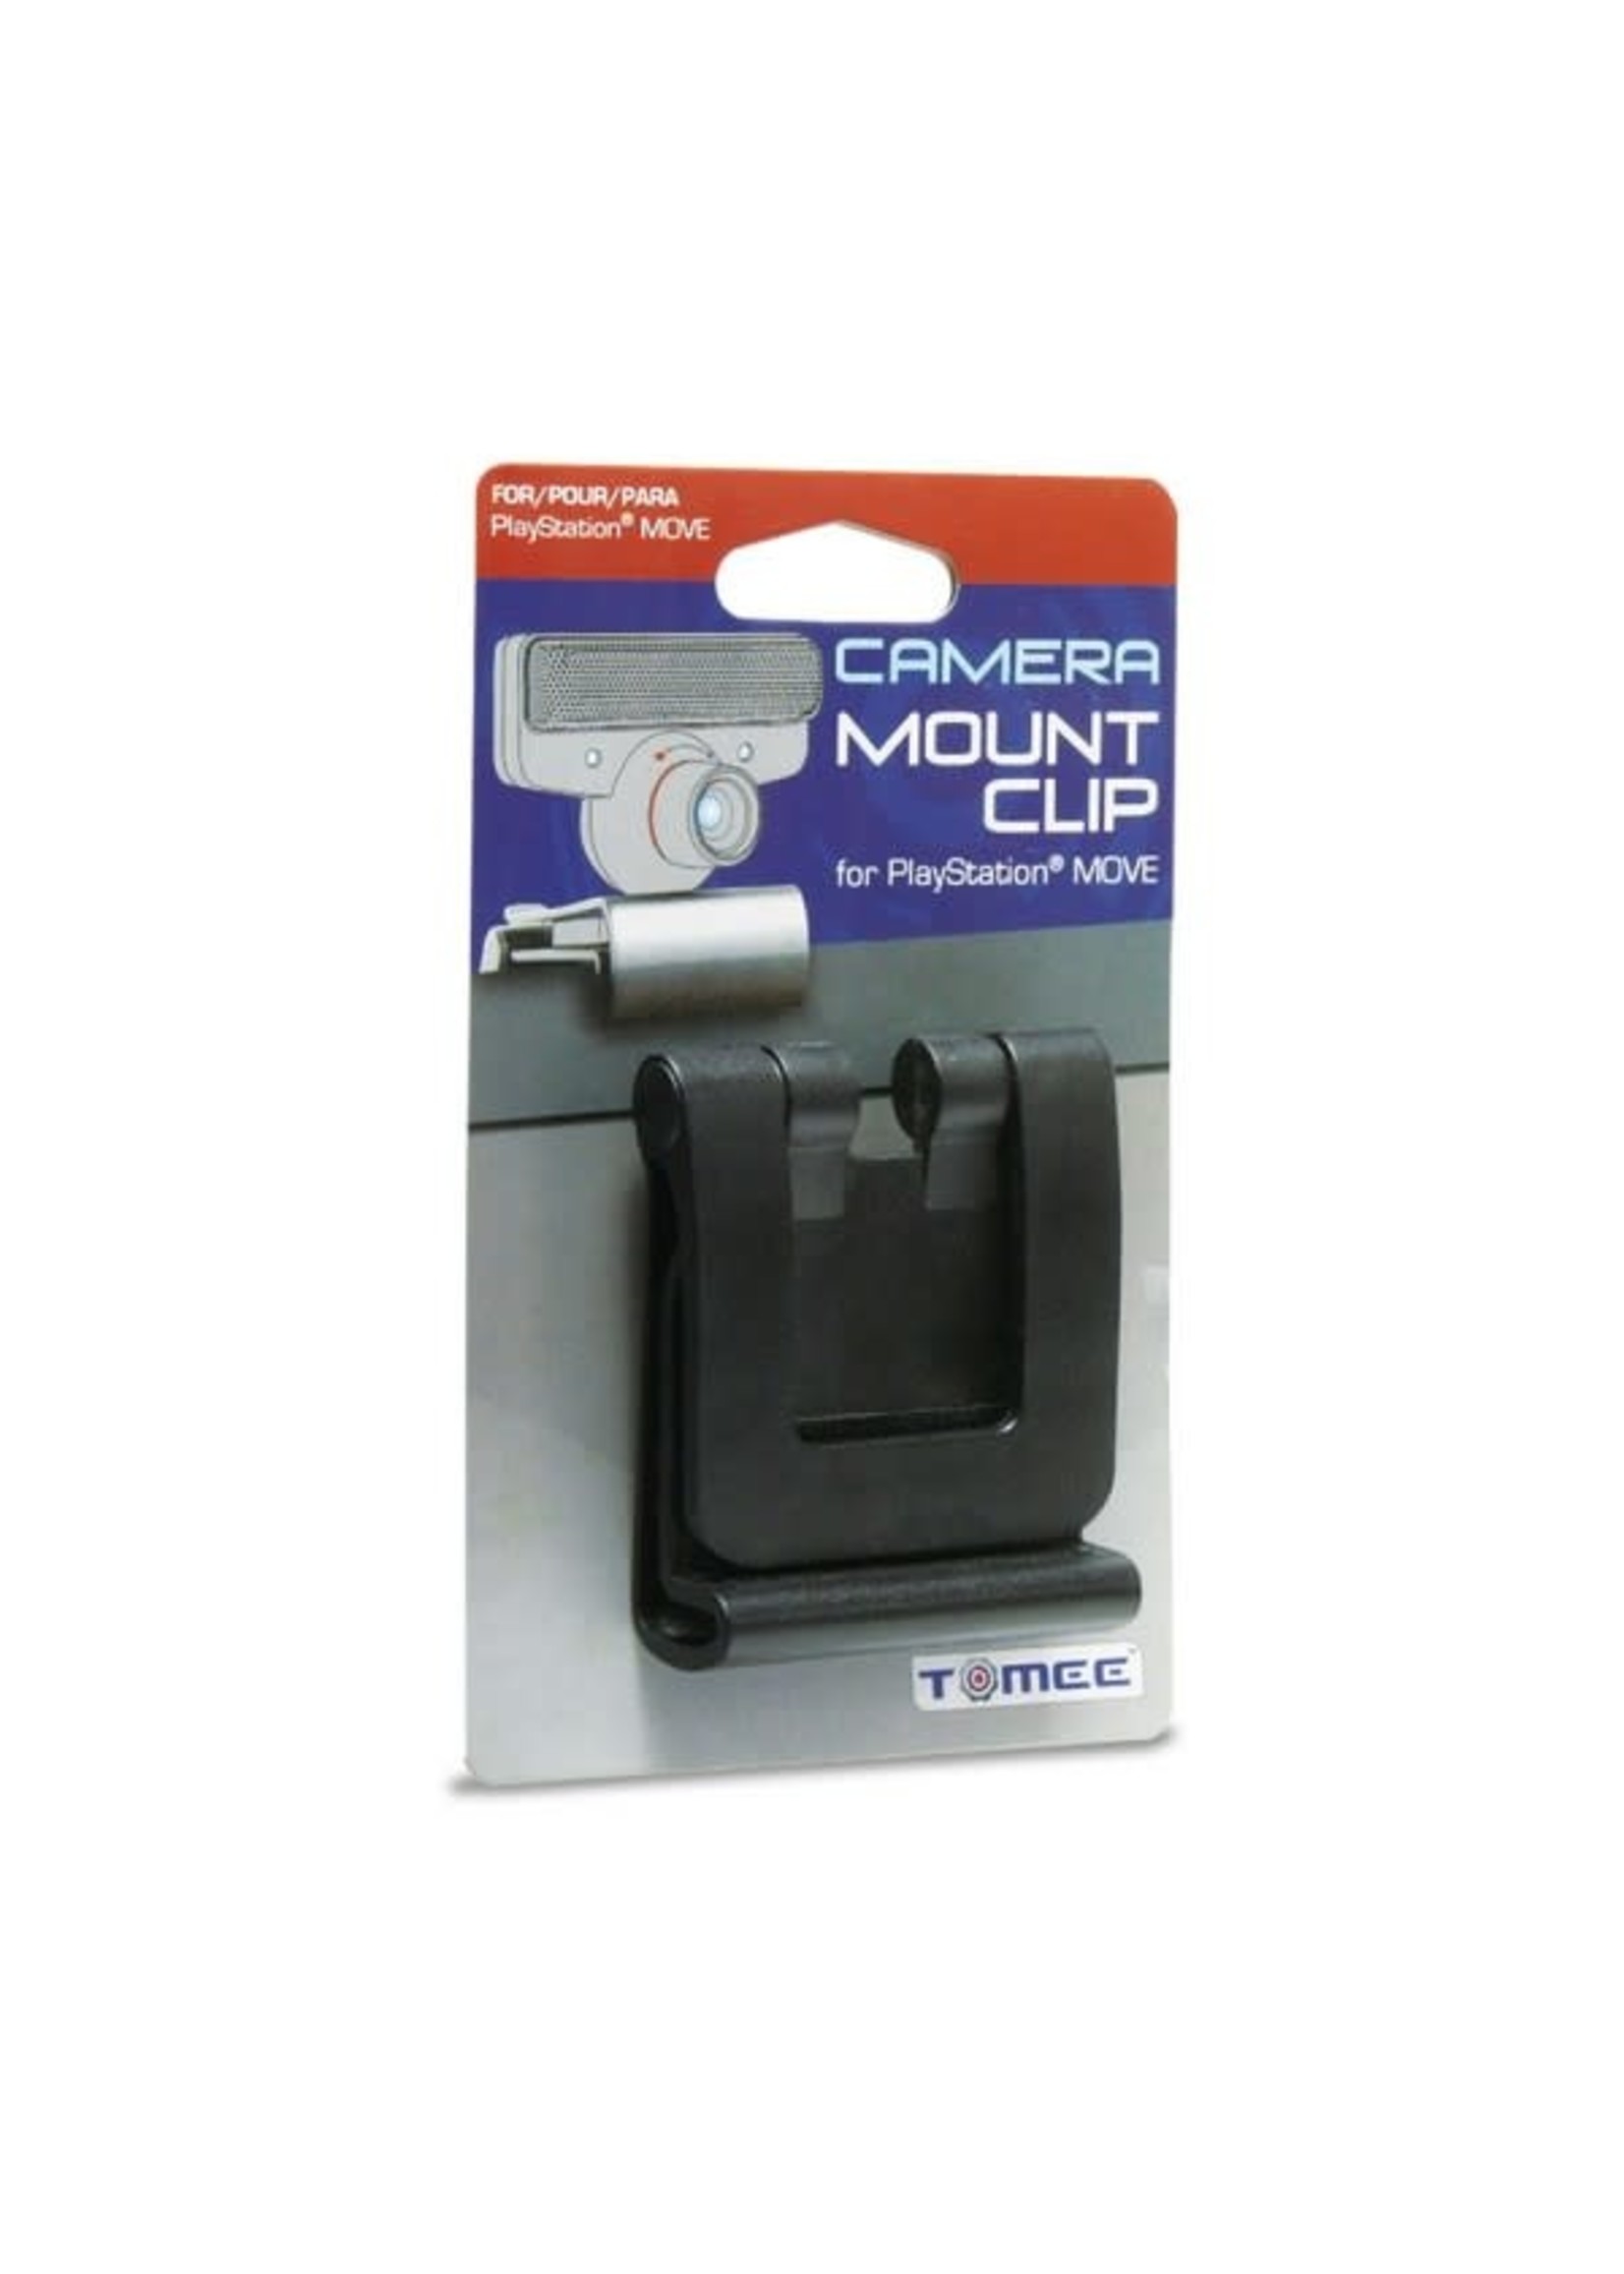 Sony Playstation 3 (PS3) PS3 PS Move Camera Mount Clip  - Tomee